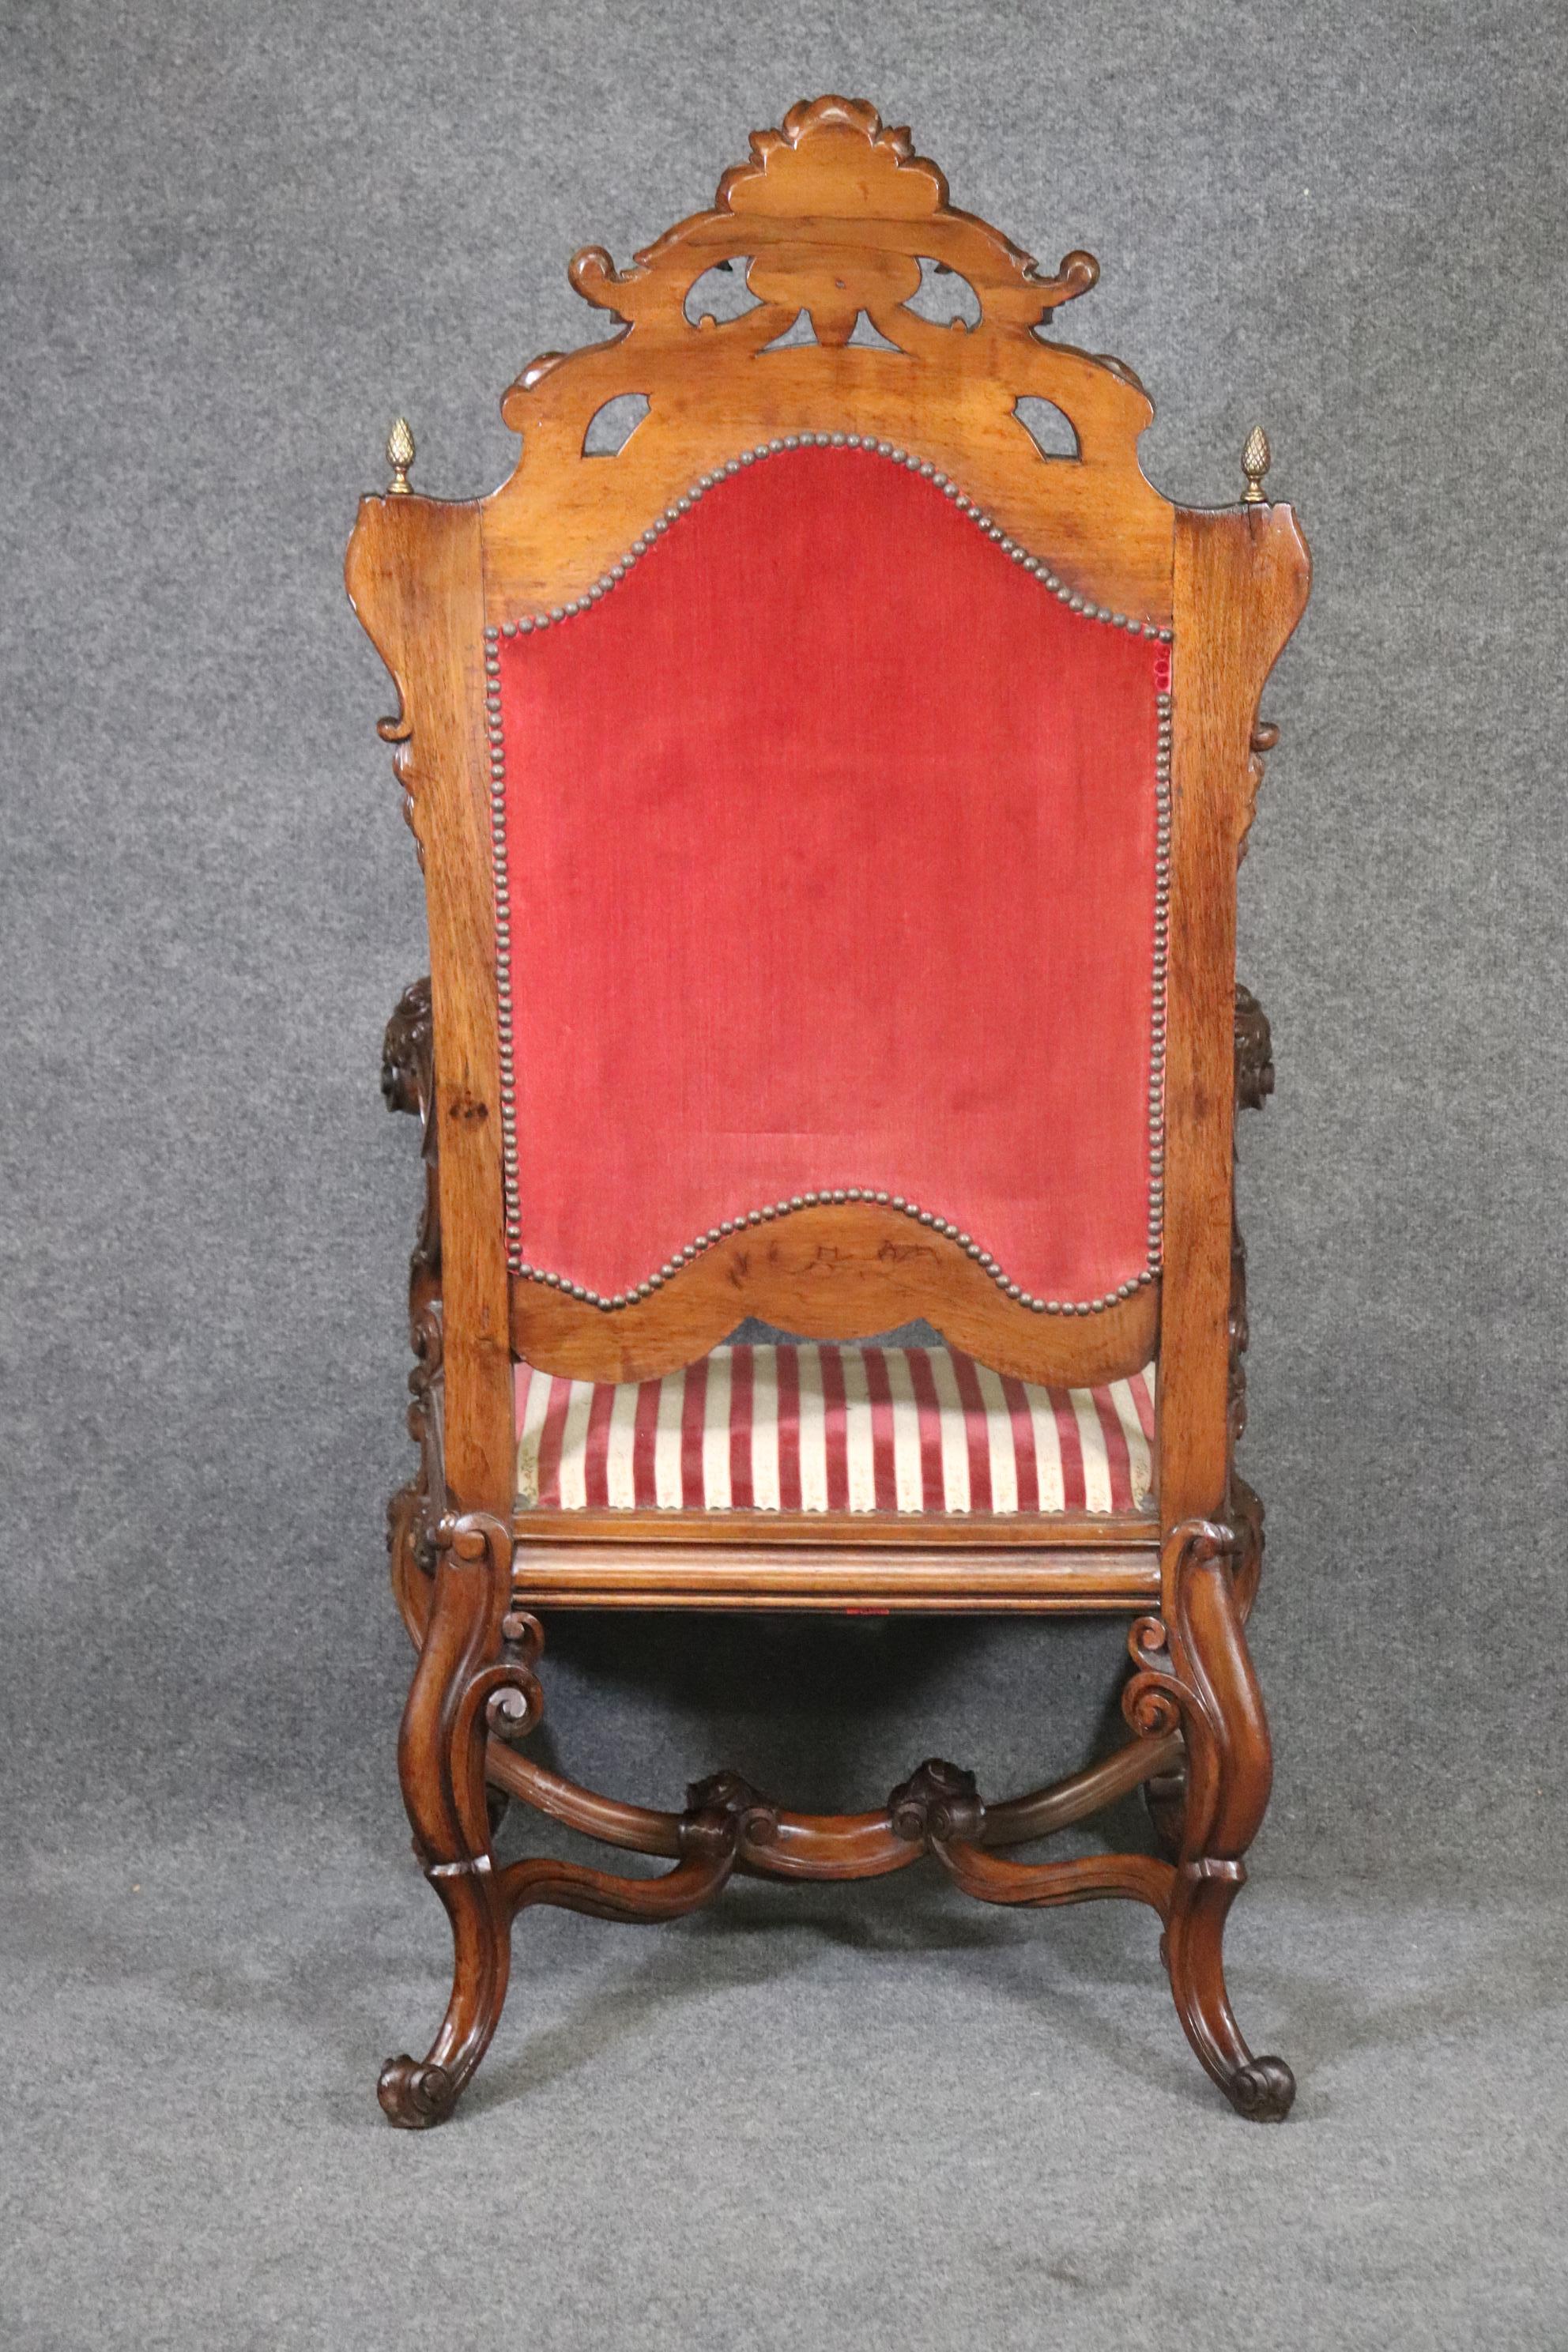 Large Heavily Carved Figural Victorian Walnut Throne Chair with Putti Cherubs  In Good Condition For Sale In Swedesboro, NJ